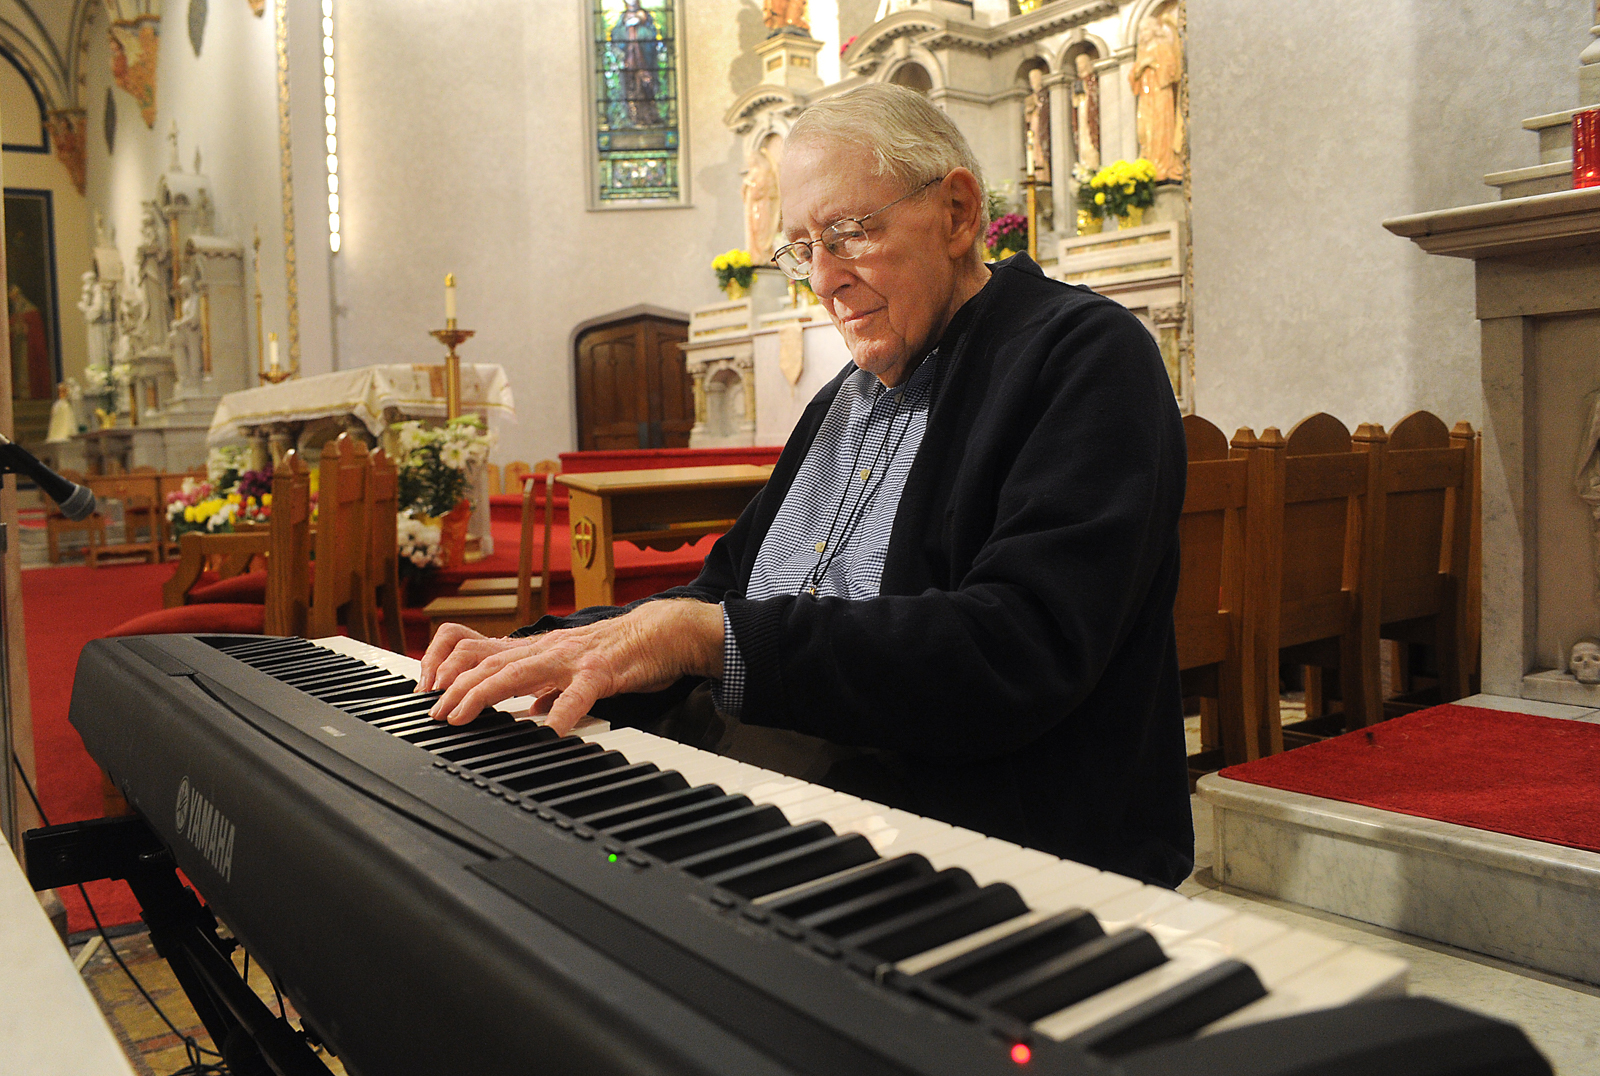 Bob Chambers, long time organist for Holy Angels Parish will be honored on May 13. He is 85, been playing for the church since 1947. He is an honorary Franciscan and Oblate, so he has habits and crosses. 
(Dan Cappellazzo/Staff photographer)